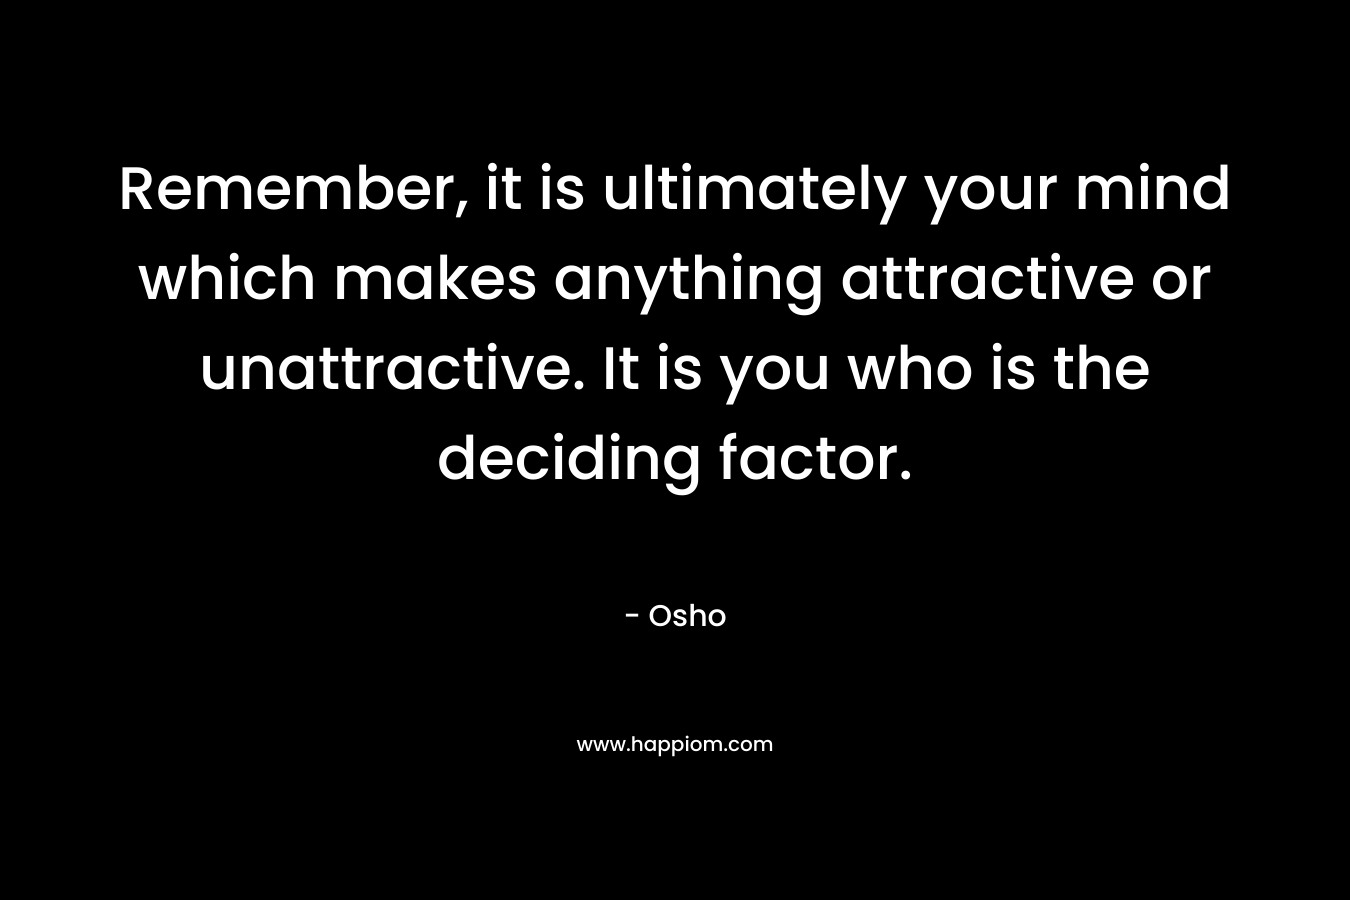 Remember, it is ultimately your mind which makes anything attractive or unattractive. It is you who is the deciding factor.